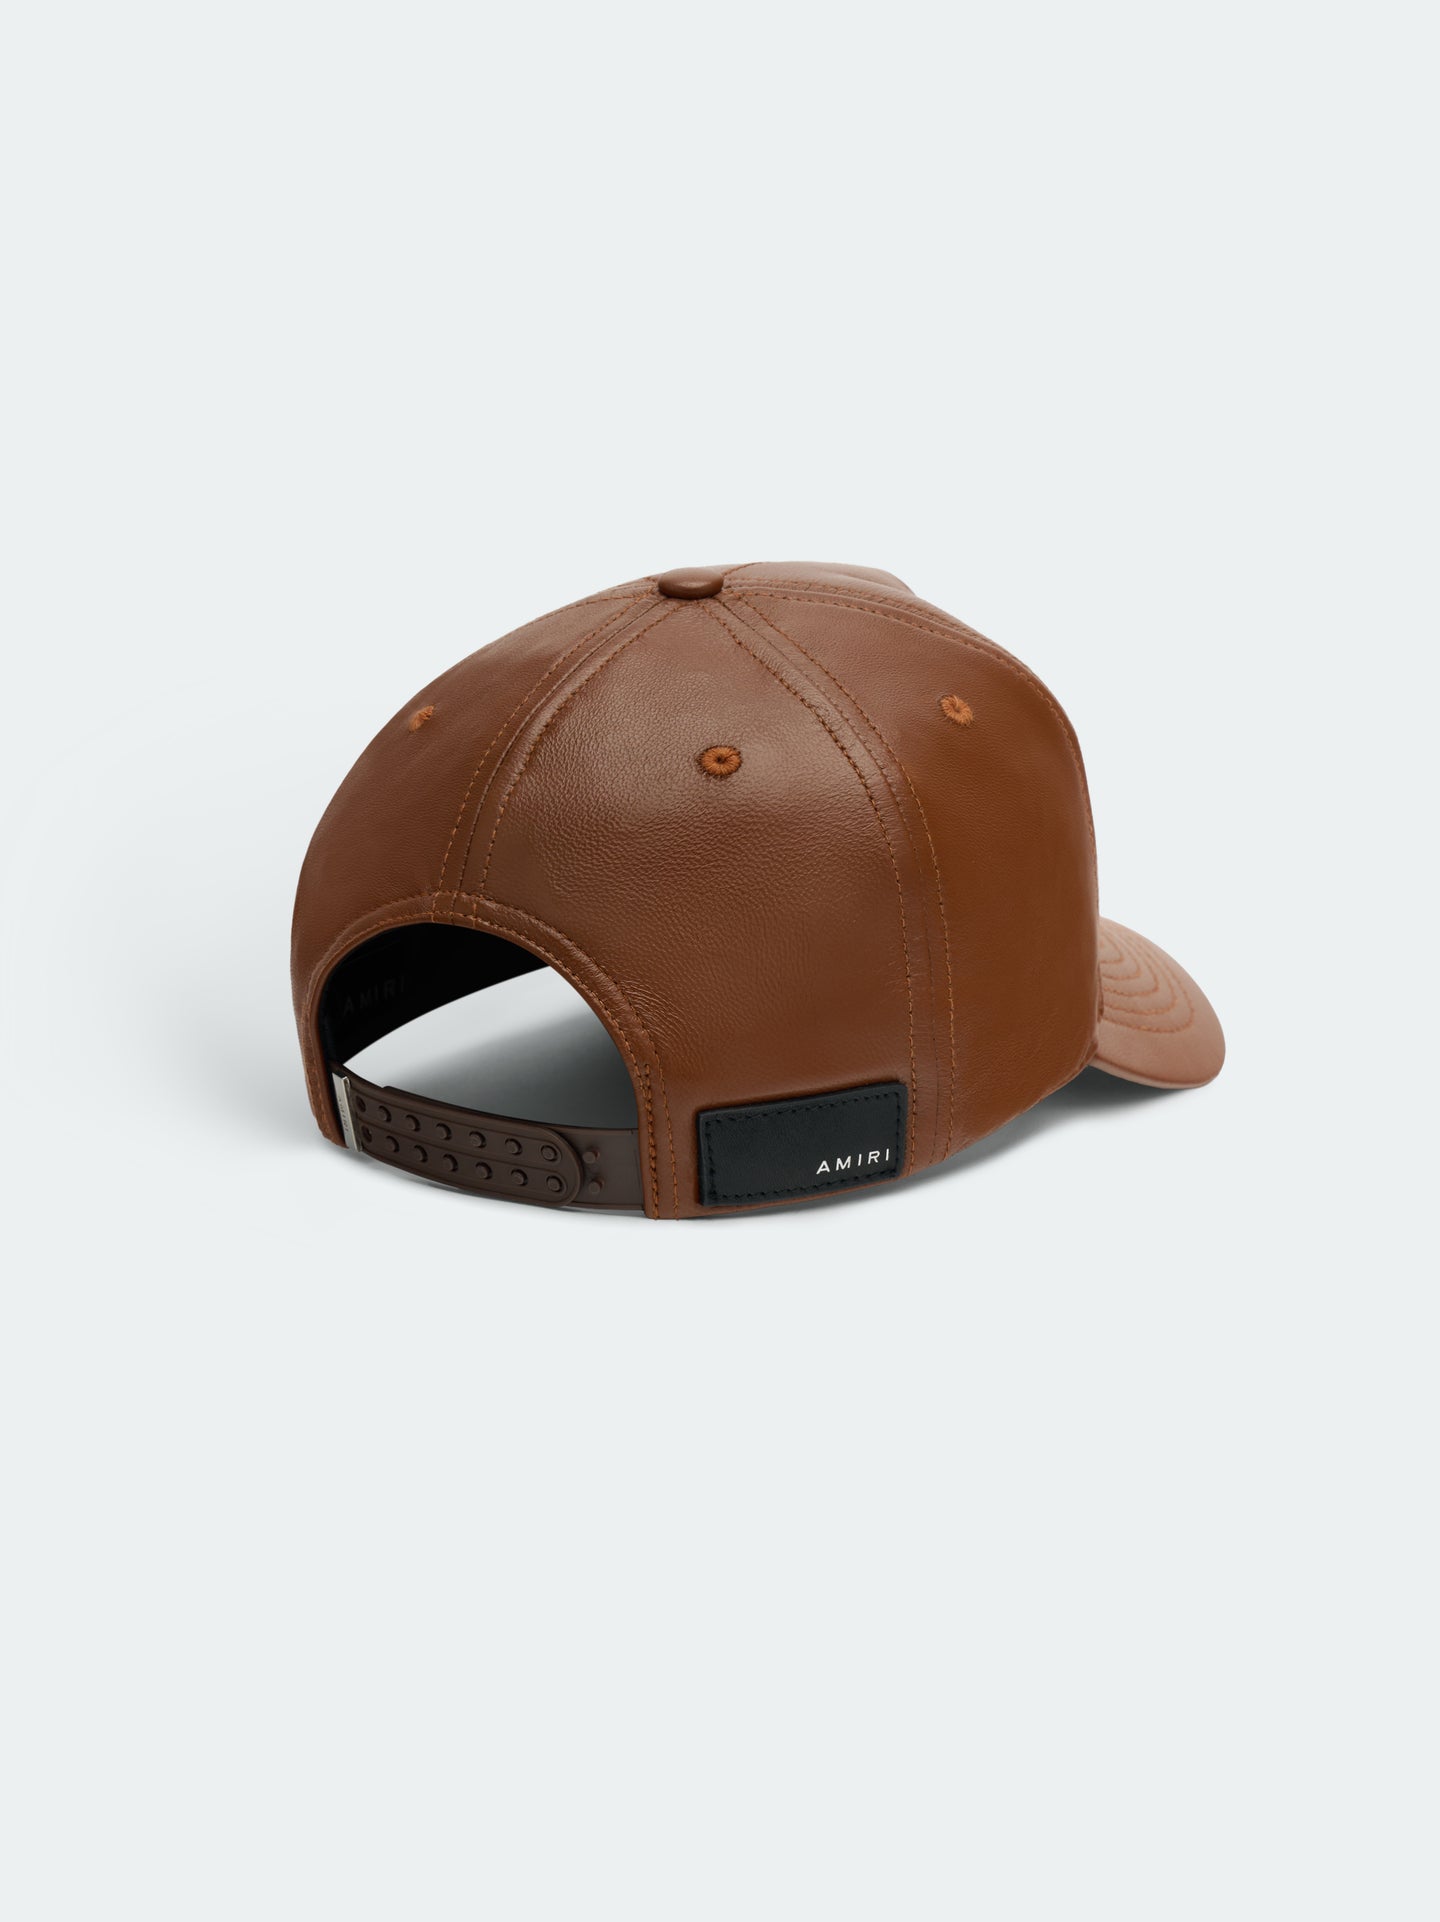 MA FULL LEATHER HAT - Brown